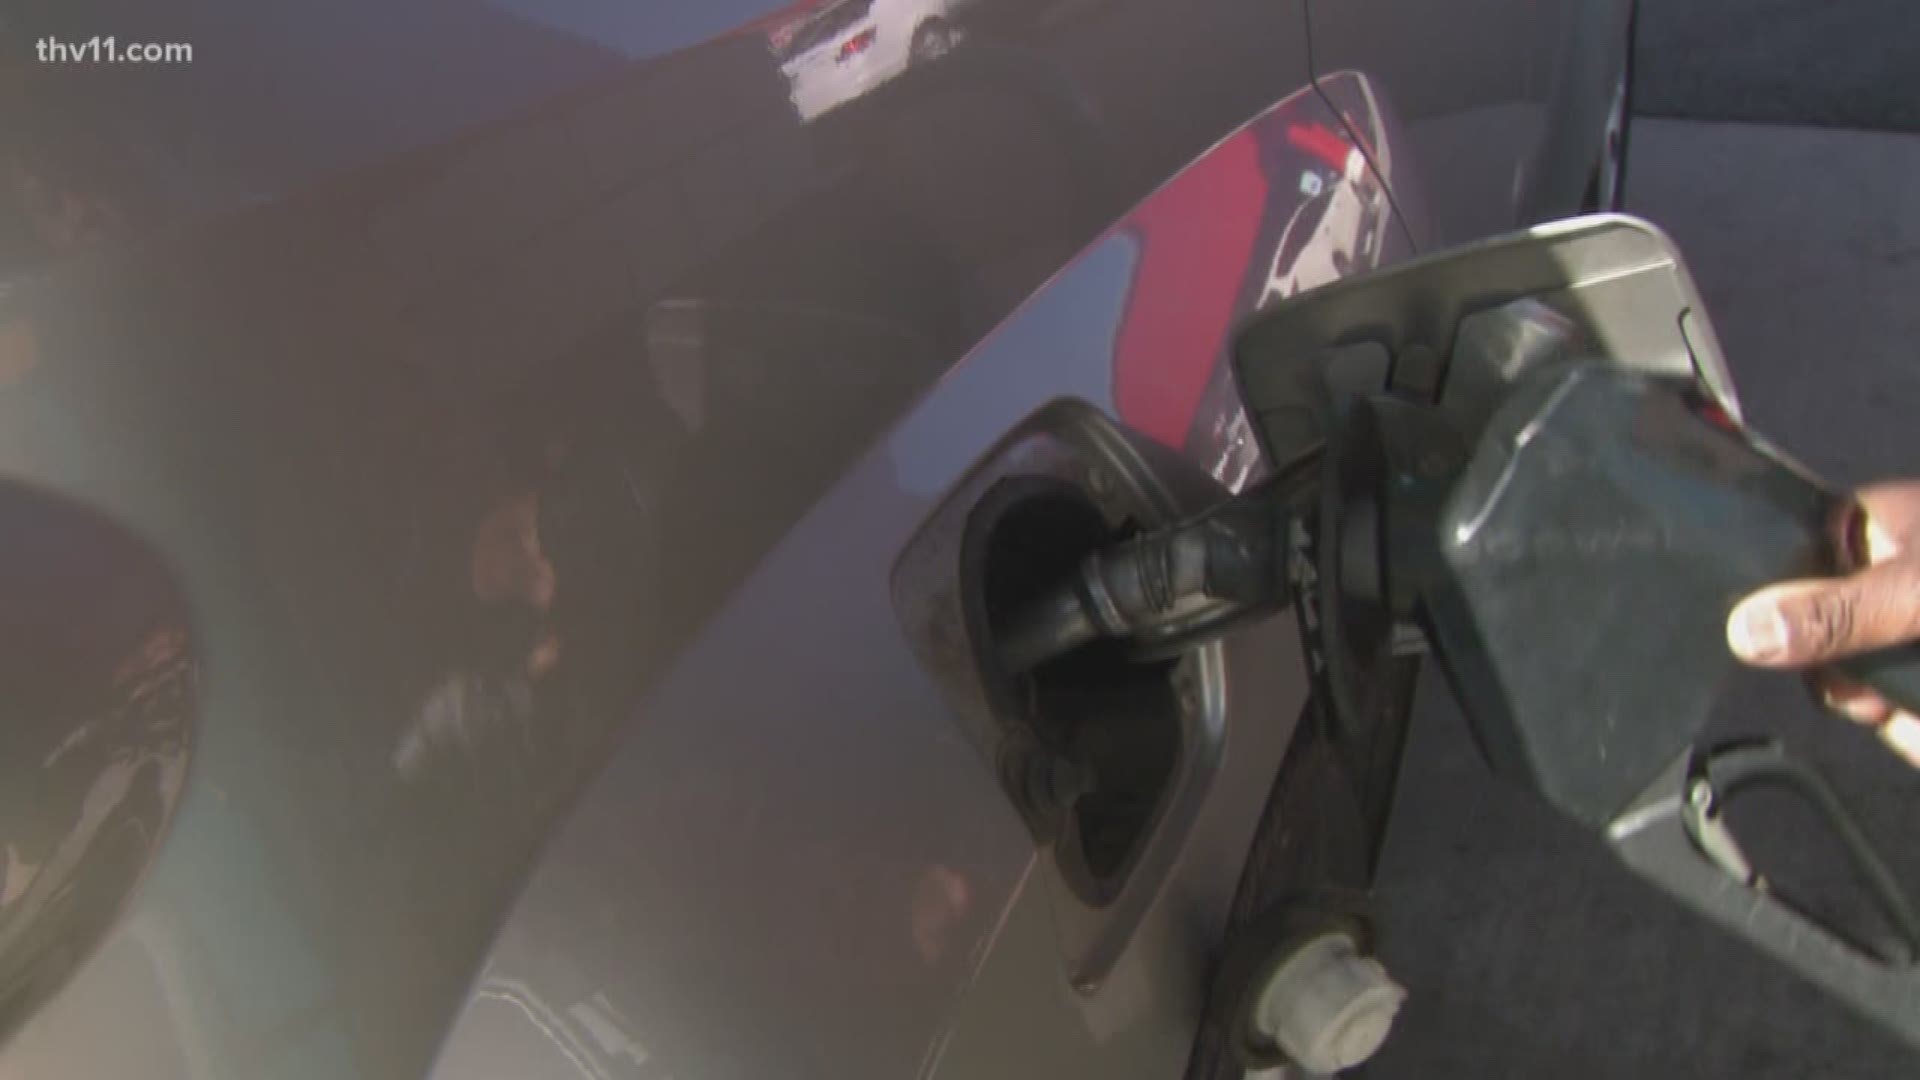 Some THV11 viewers have asked us why gasoline prices have been going up over the past few weeks, so Denise Middleton got some answers and set out to see how it's been impacting drivers.